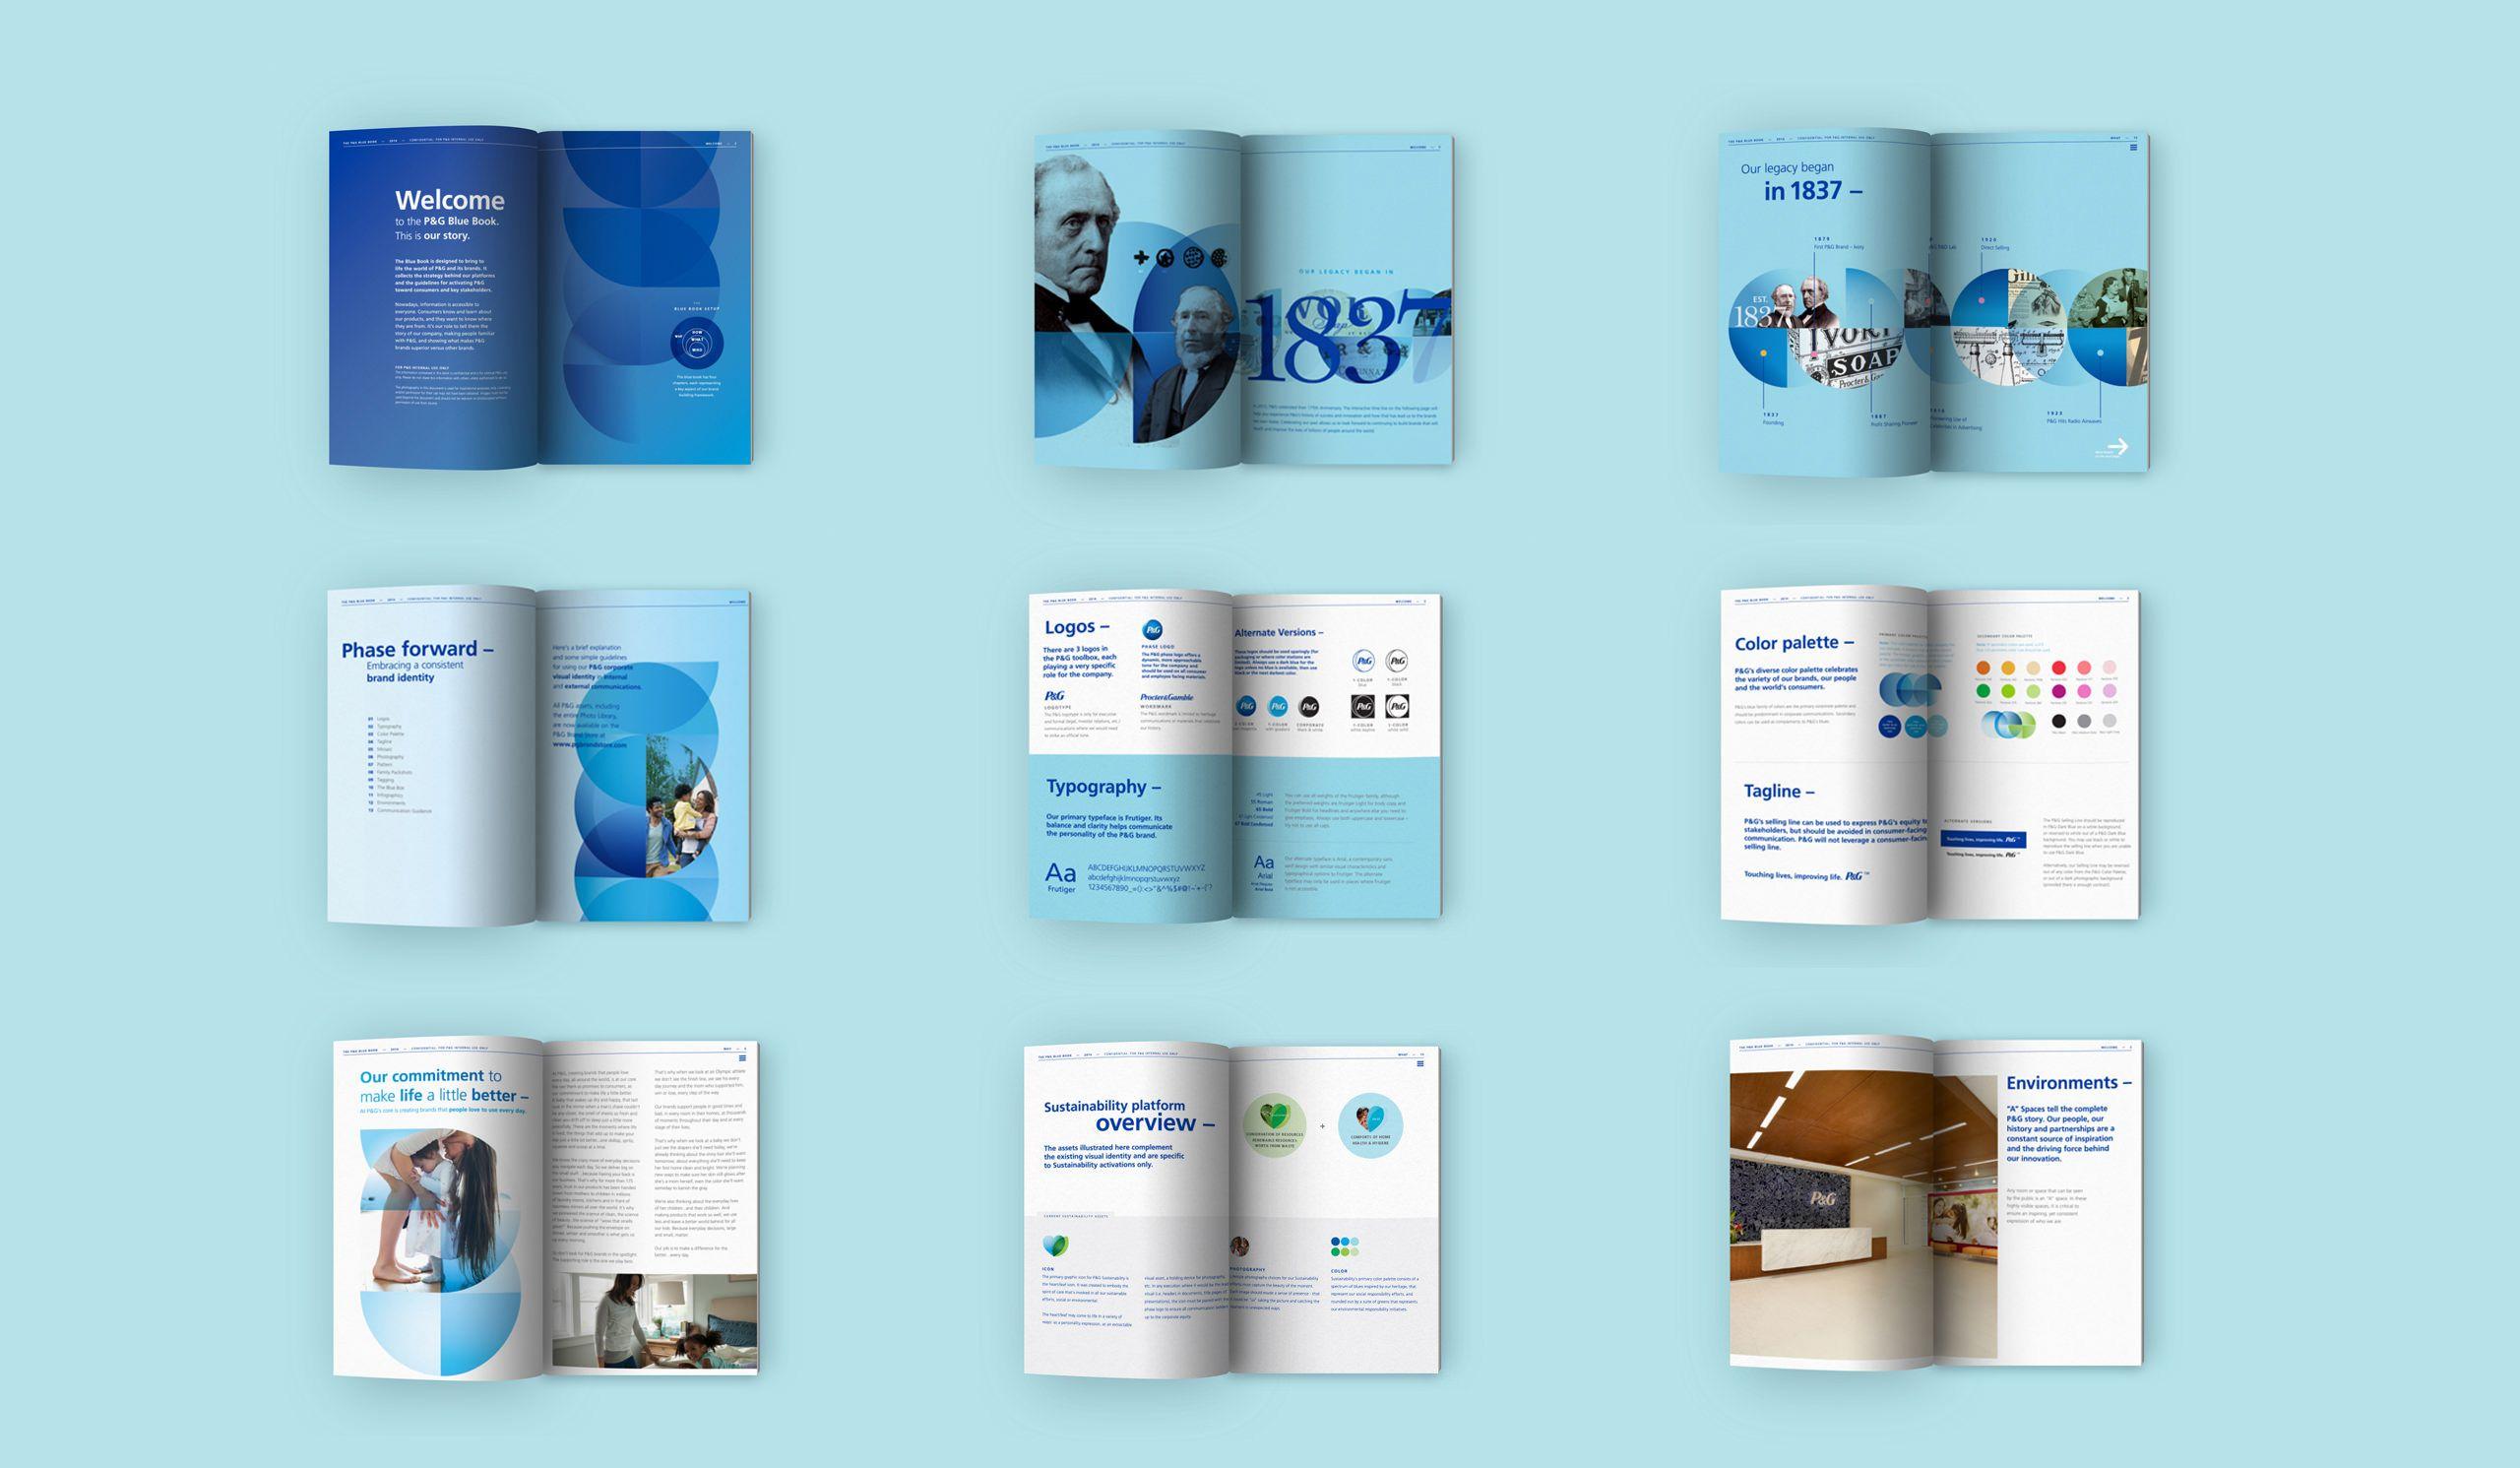 Procter and Gamble Brand Logo - P&G Blue Book on Behance